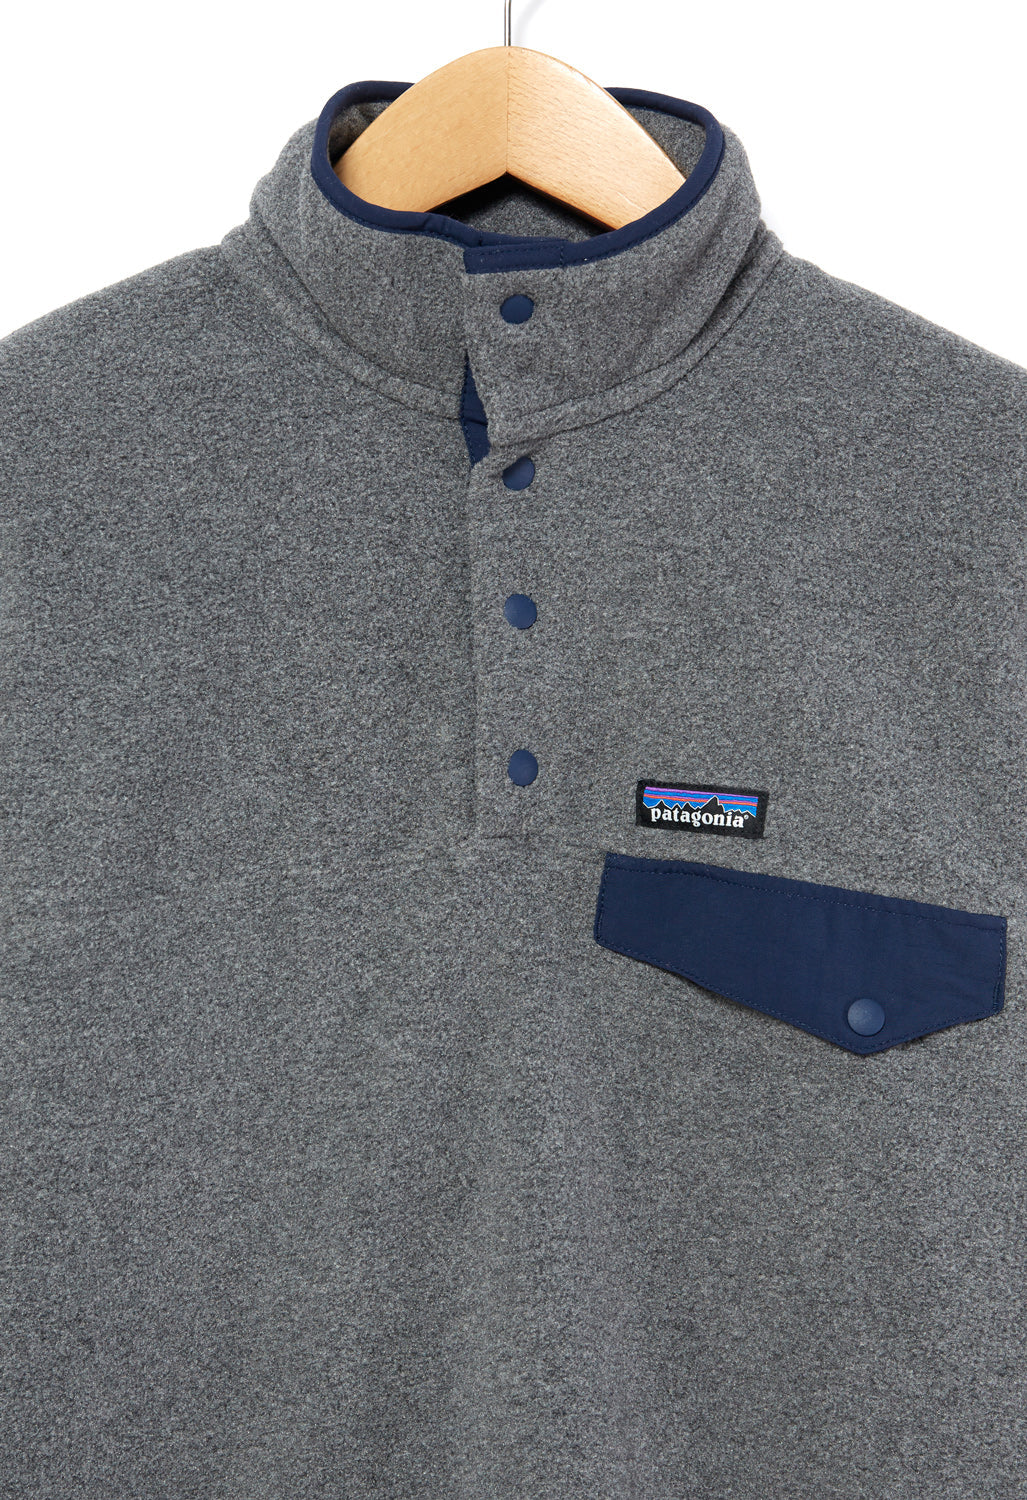 Patagonia Lwt Synchilla Snap-T Men's Pullover - Nickel – Outsiders Store UK